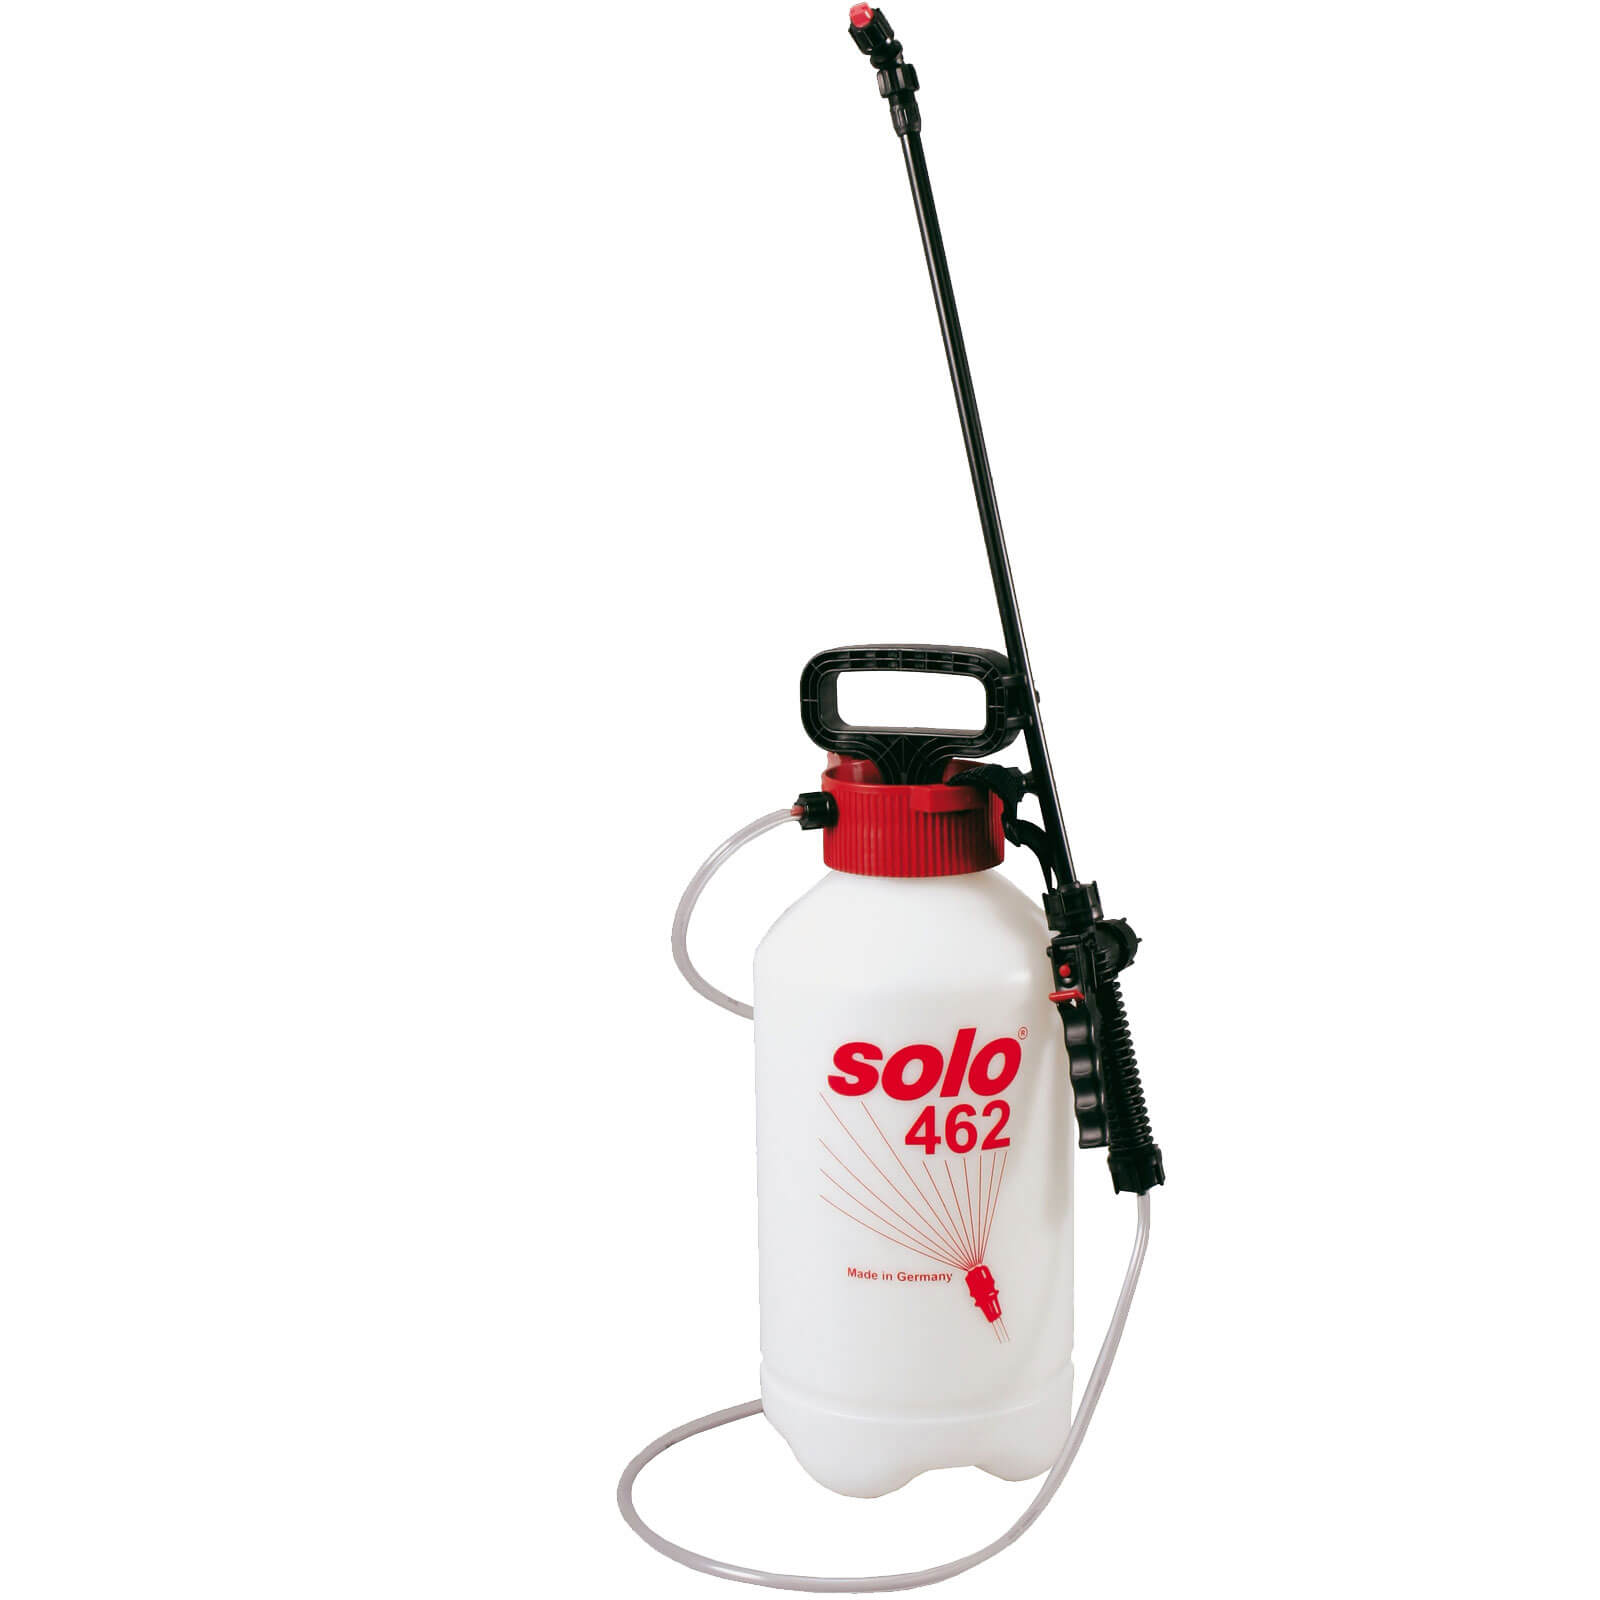 Solo 462 Chemical & Water Pressure Sprayer 9.5 Litres Holds 7 Litres with 500mm Spray Lance